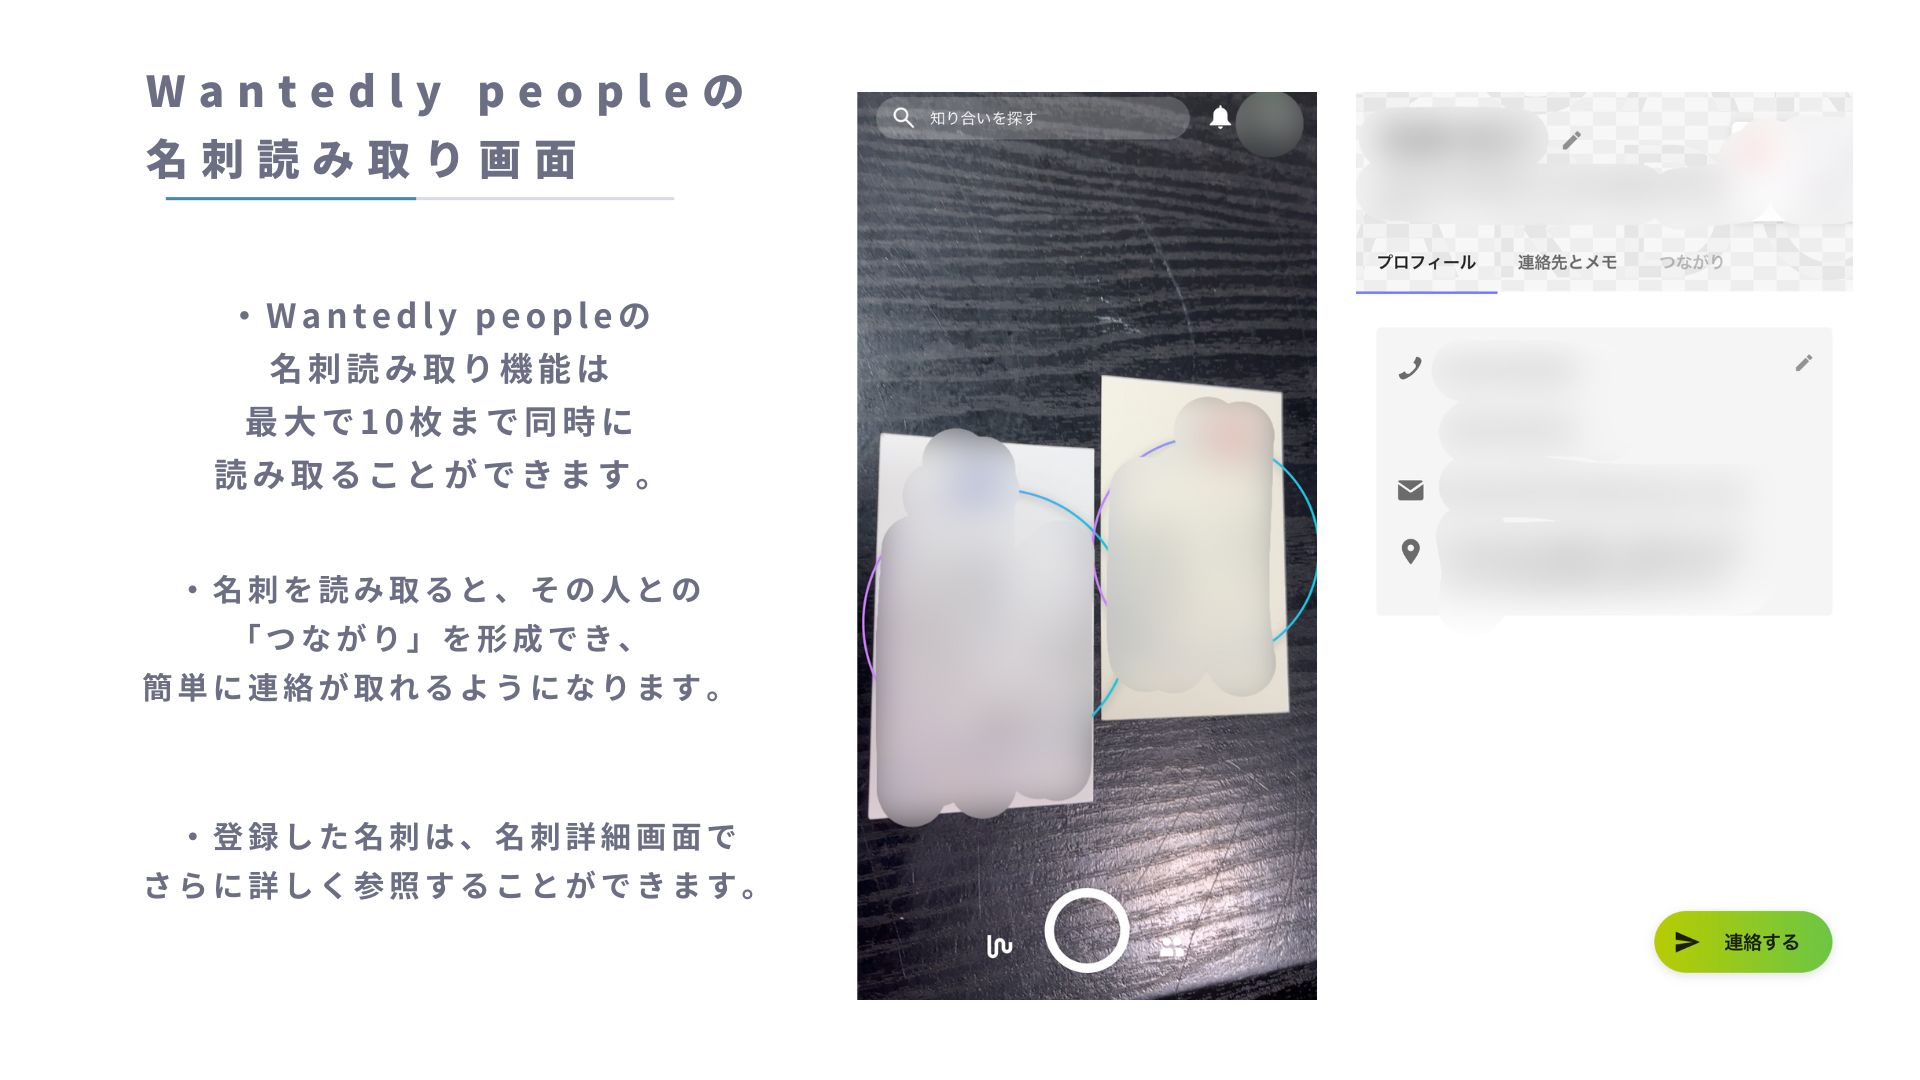 Wantedly Peopleの名刺読み取り画面（Wantedly Peopleの実際のアプリ画面）